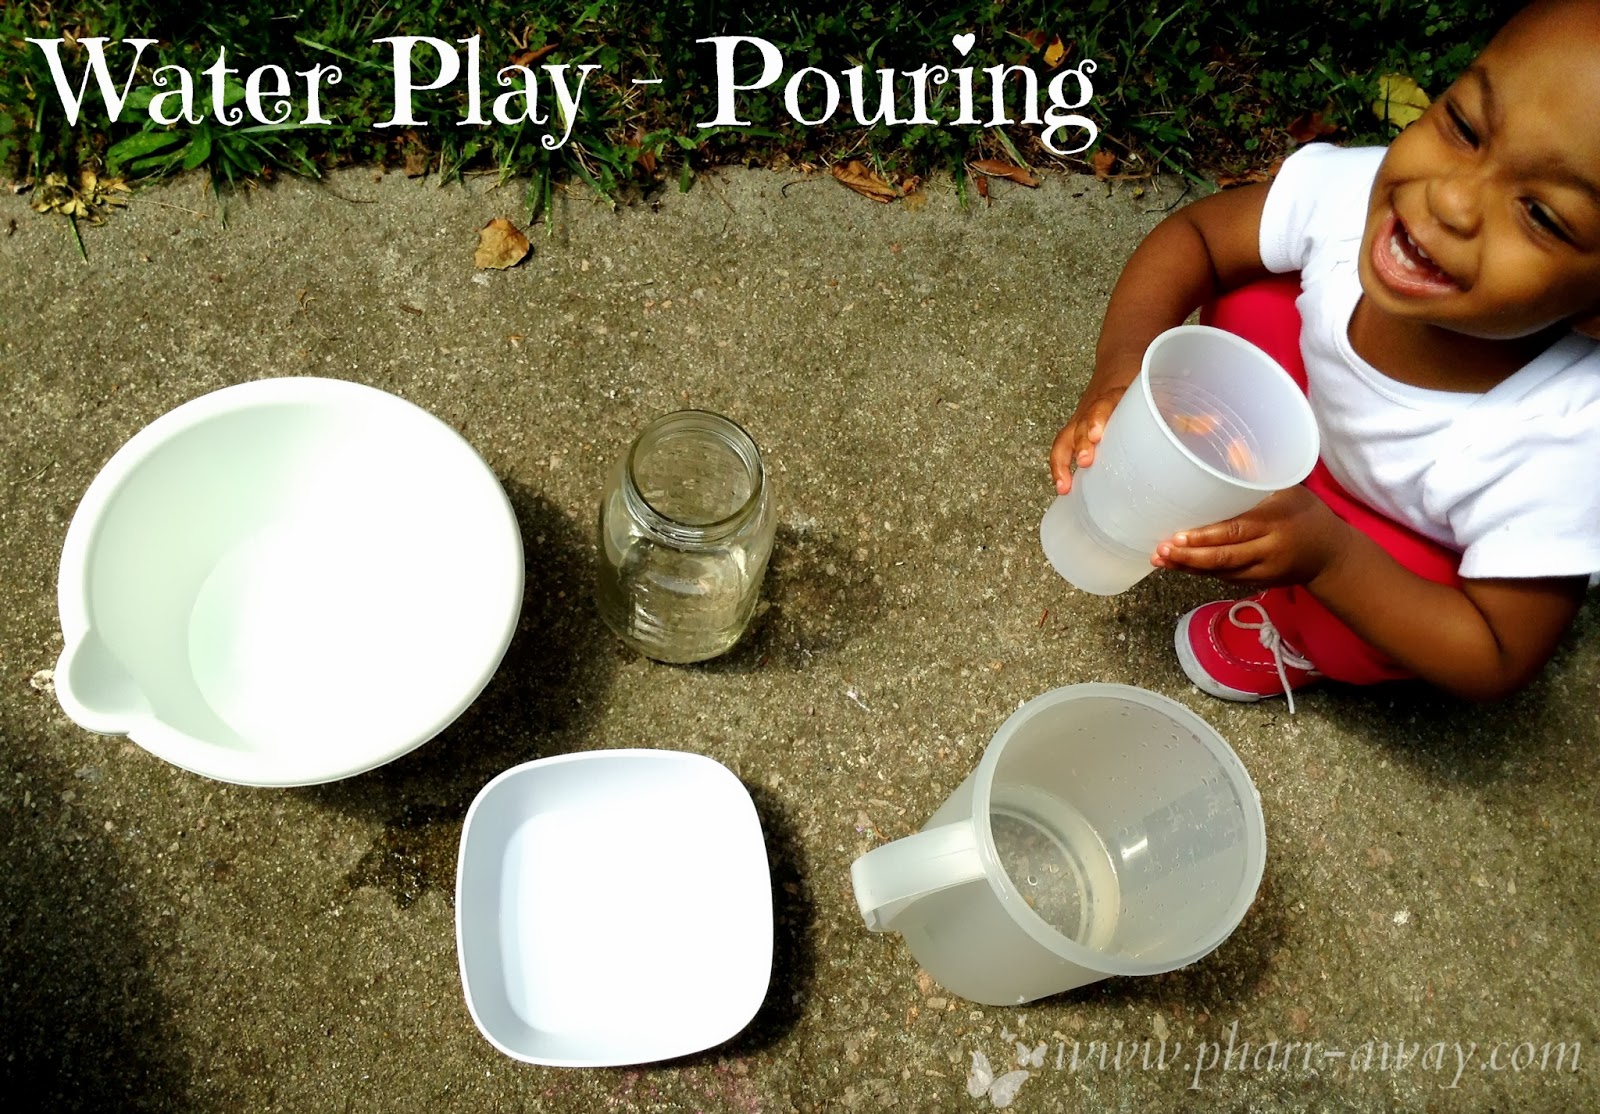 Water Play - Pouring!